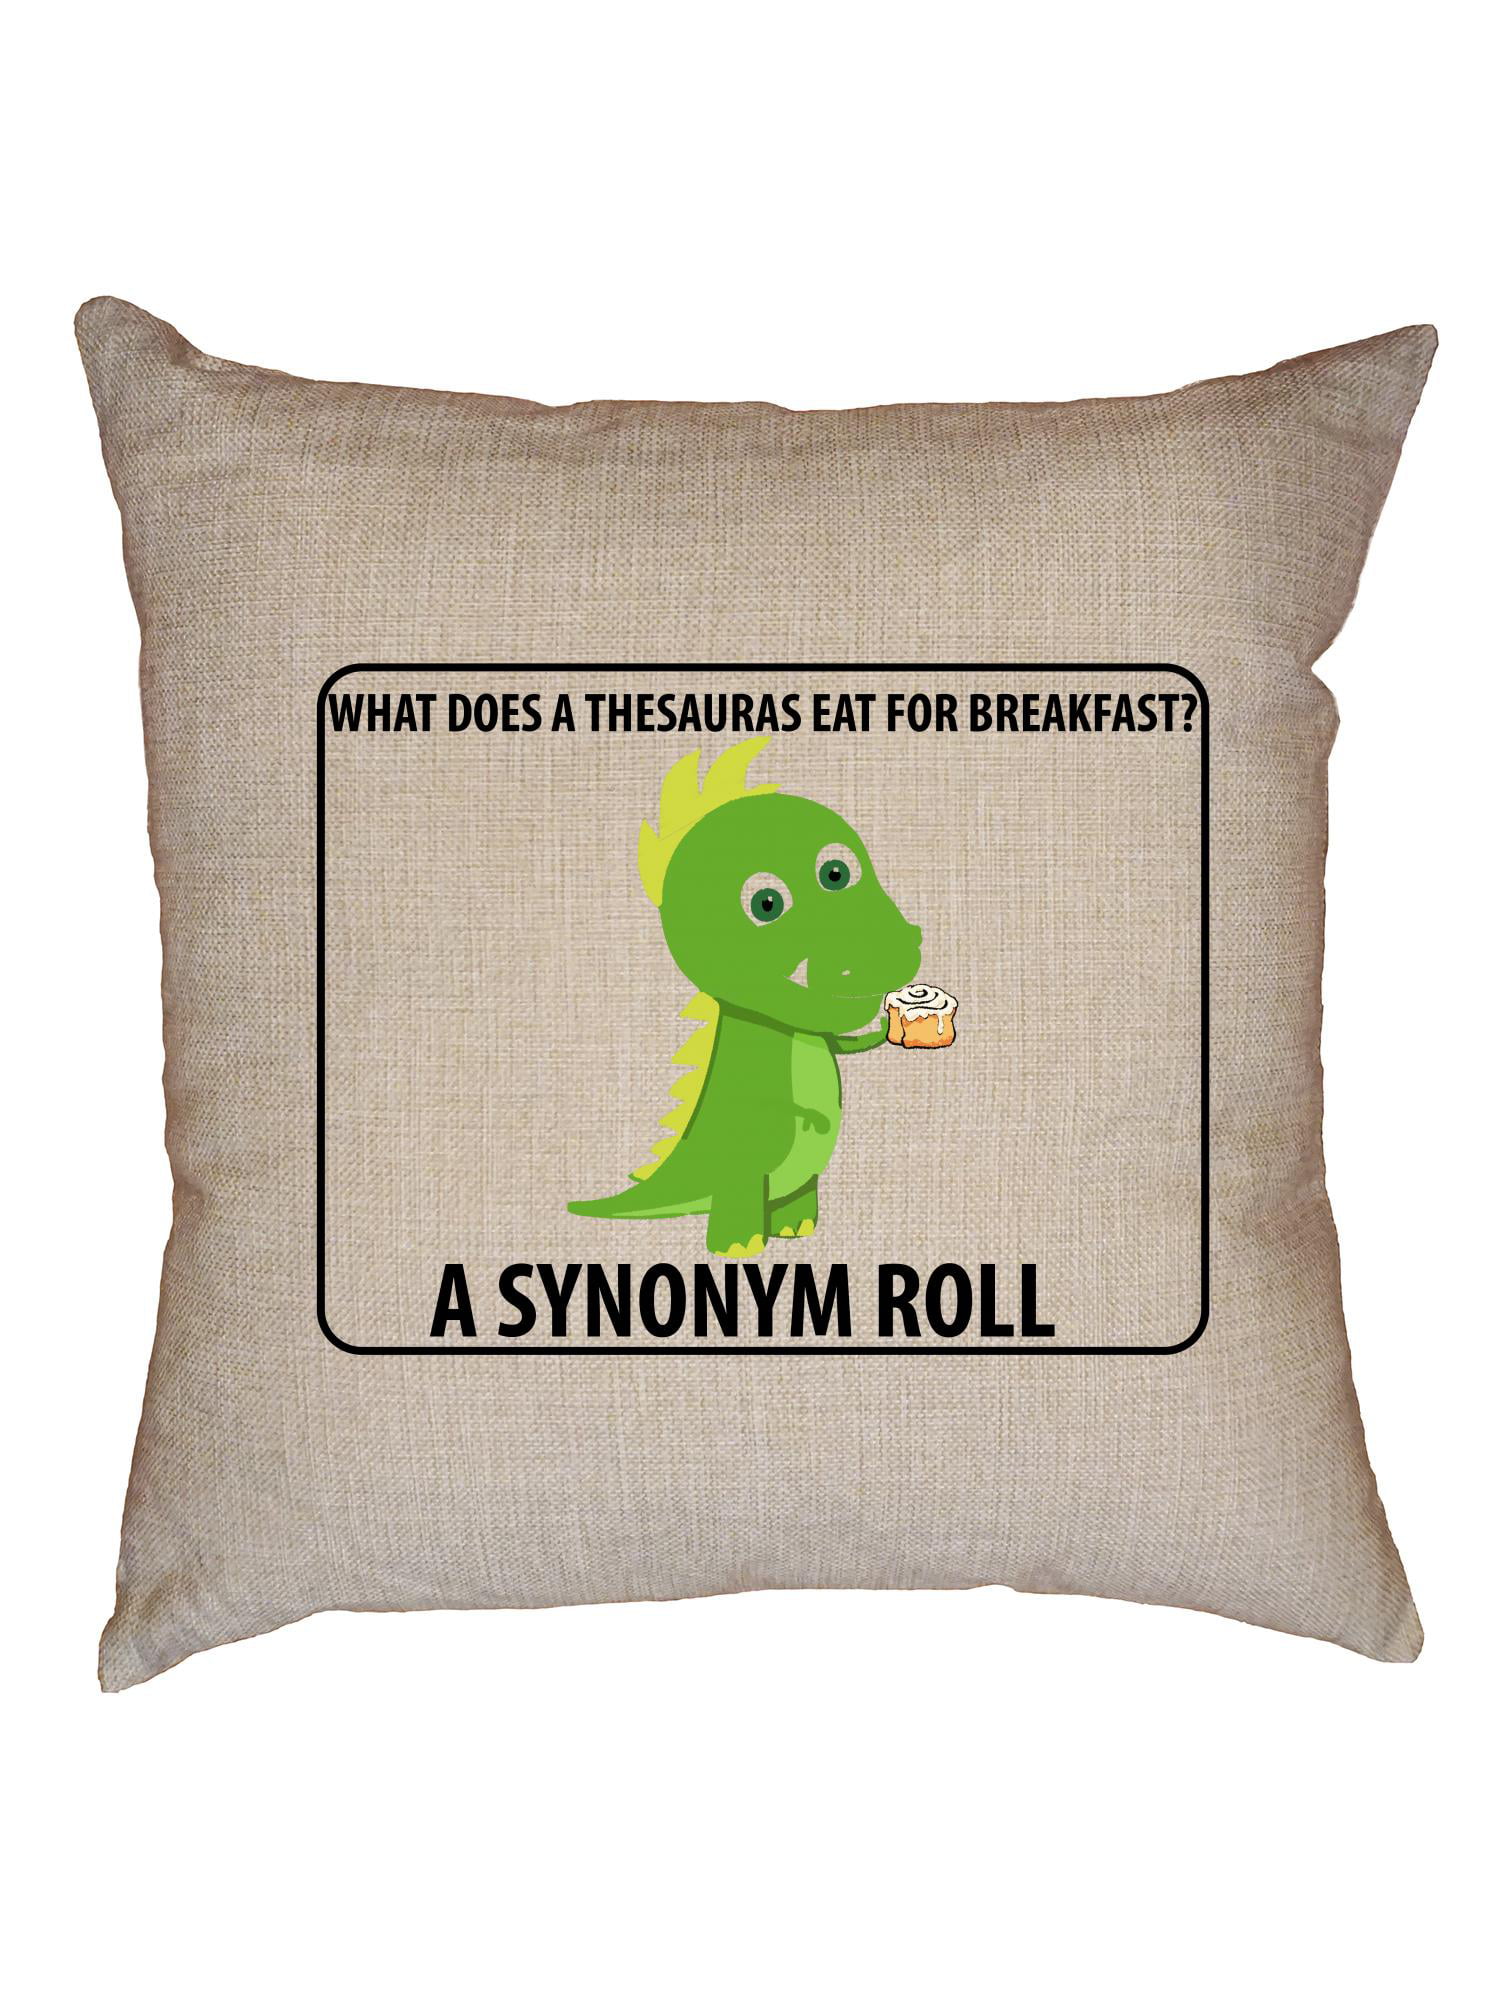 Thesaurus Ate A Synonym Roll For Breakfast Cute Dinosaur Decorative Linen Throw Cushion Pillow Case With Insert Com